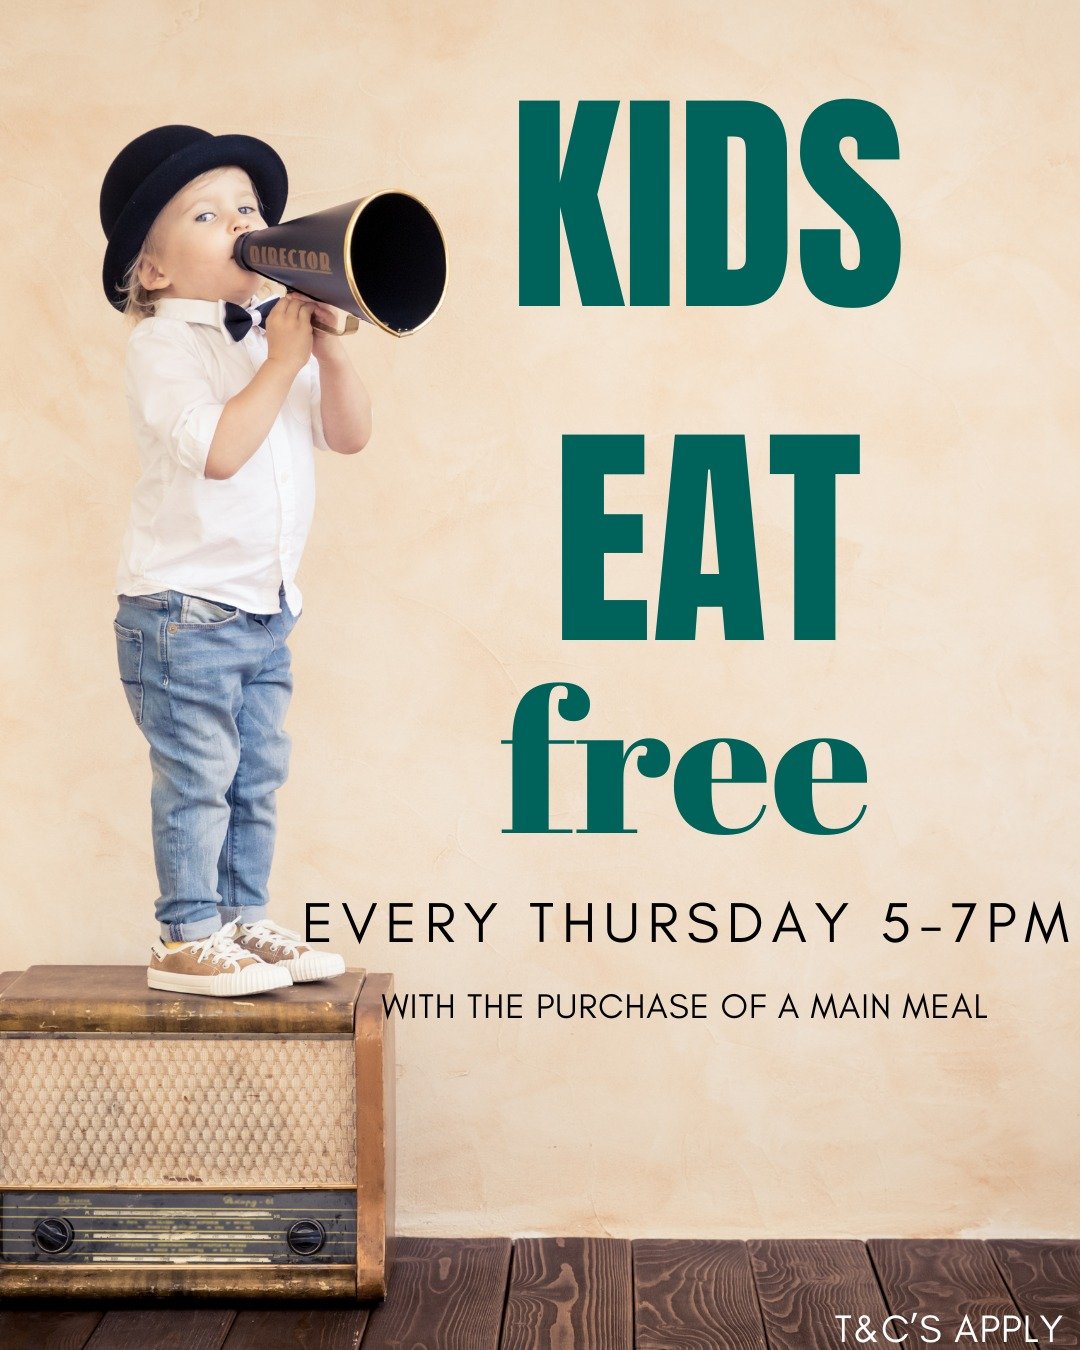 👨&zwj;👩&zwj;👧&zwj;👦🍽️ Hey parents, here's a treat for you and the little ones! Kids eat free with the purchase of a main meal at Mudgee Brewing Co.! 🎉 Bring the whole family down to enjoy a delicious meal together without breaking the bank.

 #